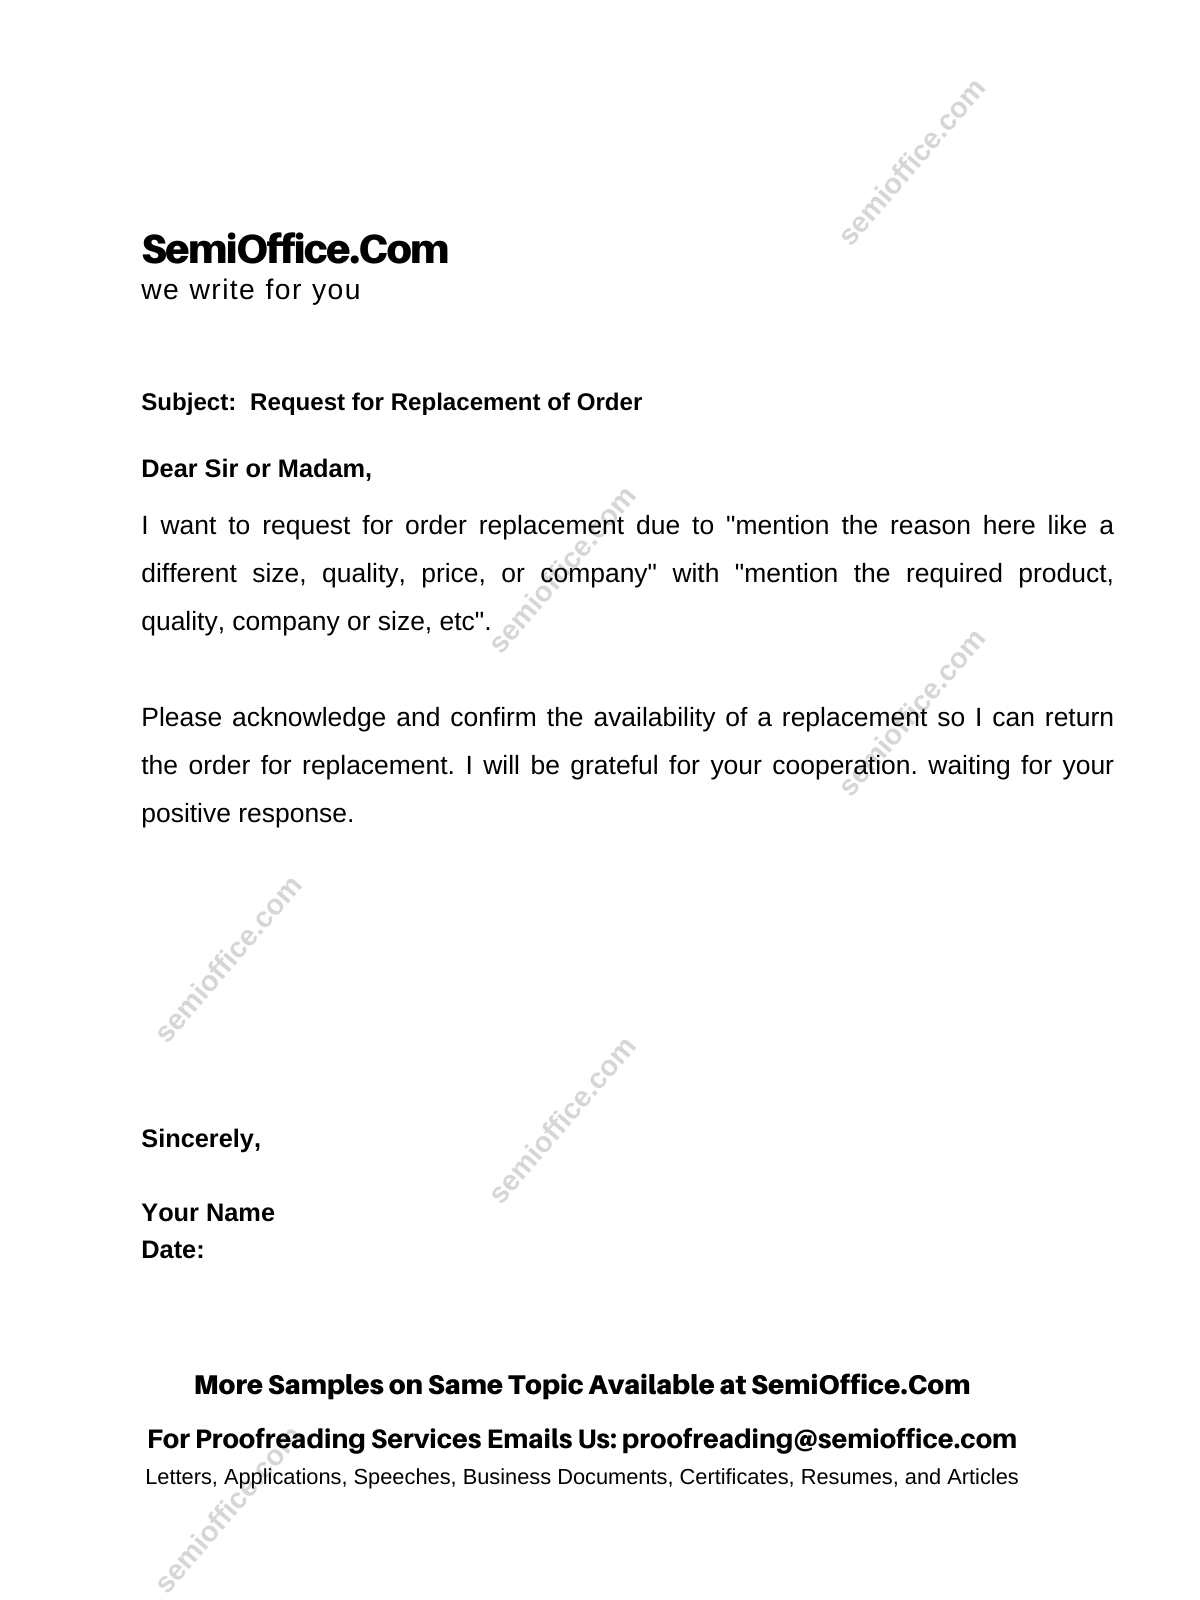 request-letter-for-replacement-of-an-item-semioffice-com